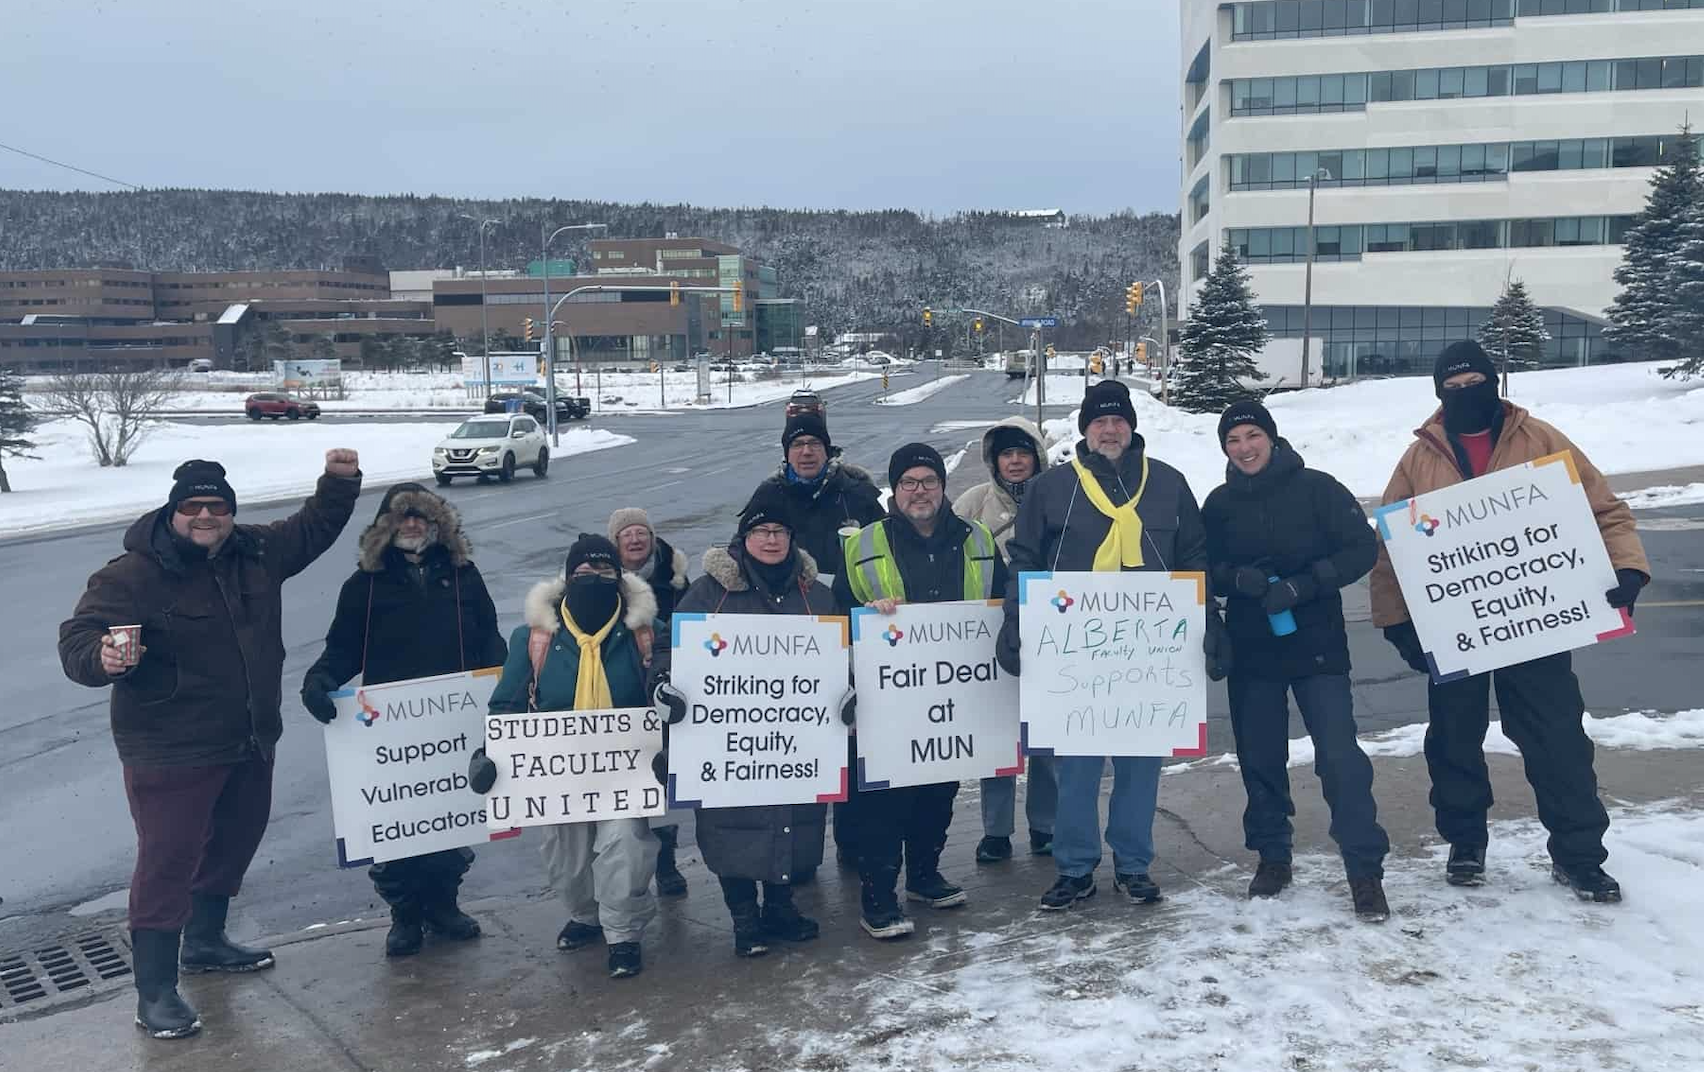 MUNFA picketers stand holding signs on a snowy day in St. John's. The signs advocate for democracy, equity & fairness, supporting vulnerable educators, and a fair deal at MUN